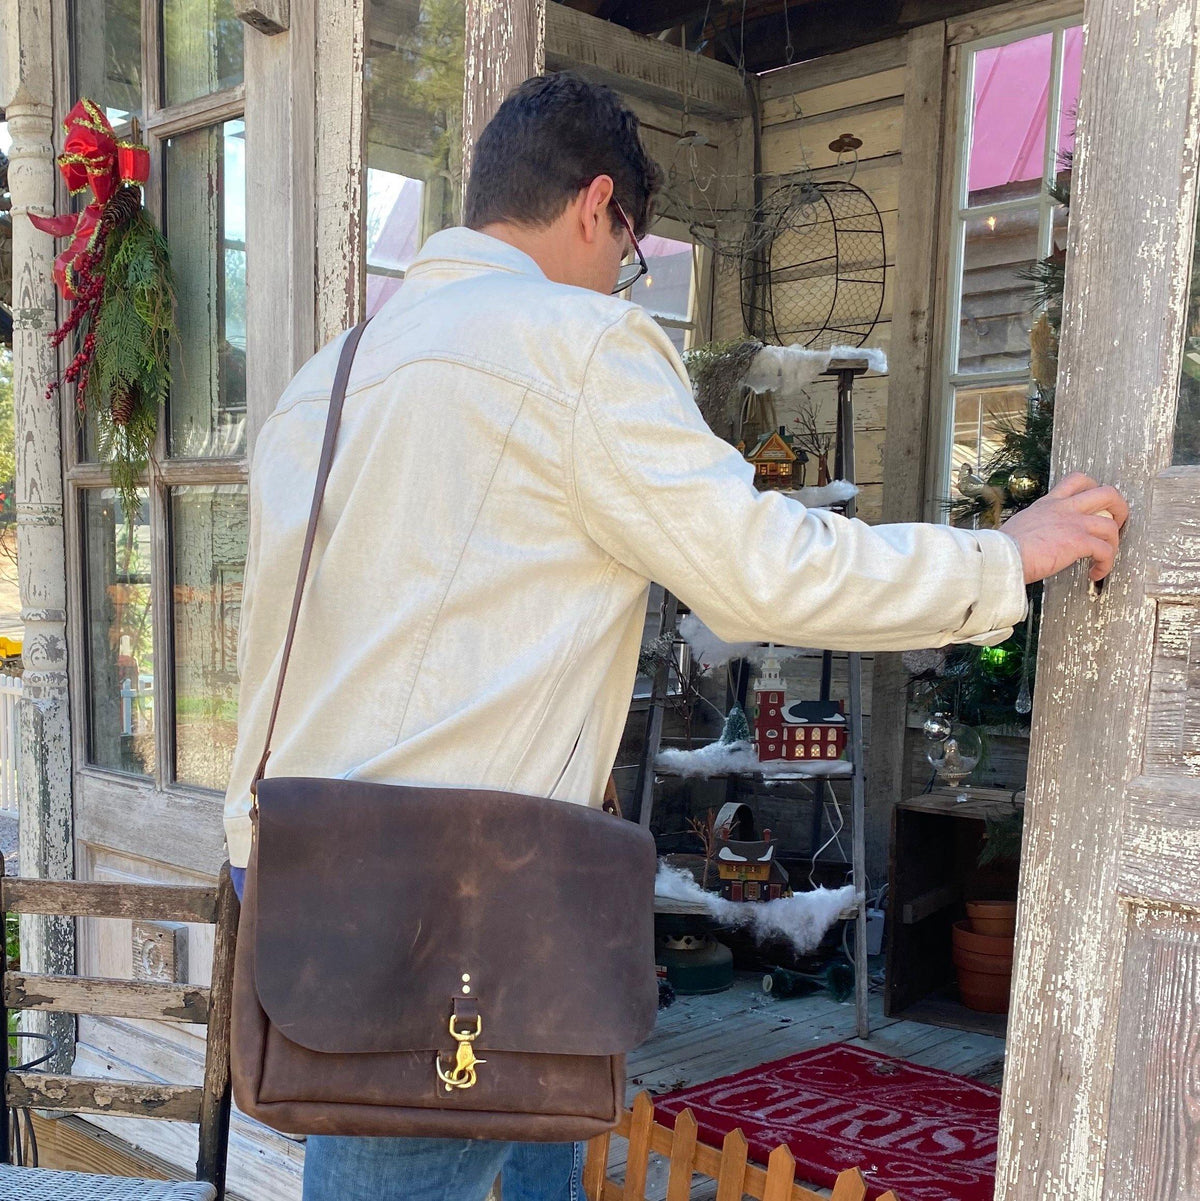 Leather Pasture Home of Fine Leather Handcrafted Goods - Raleigh NC